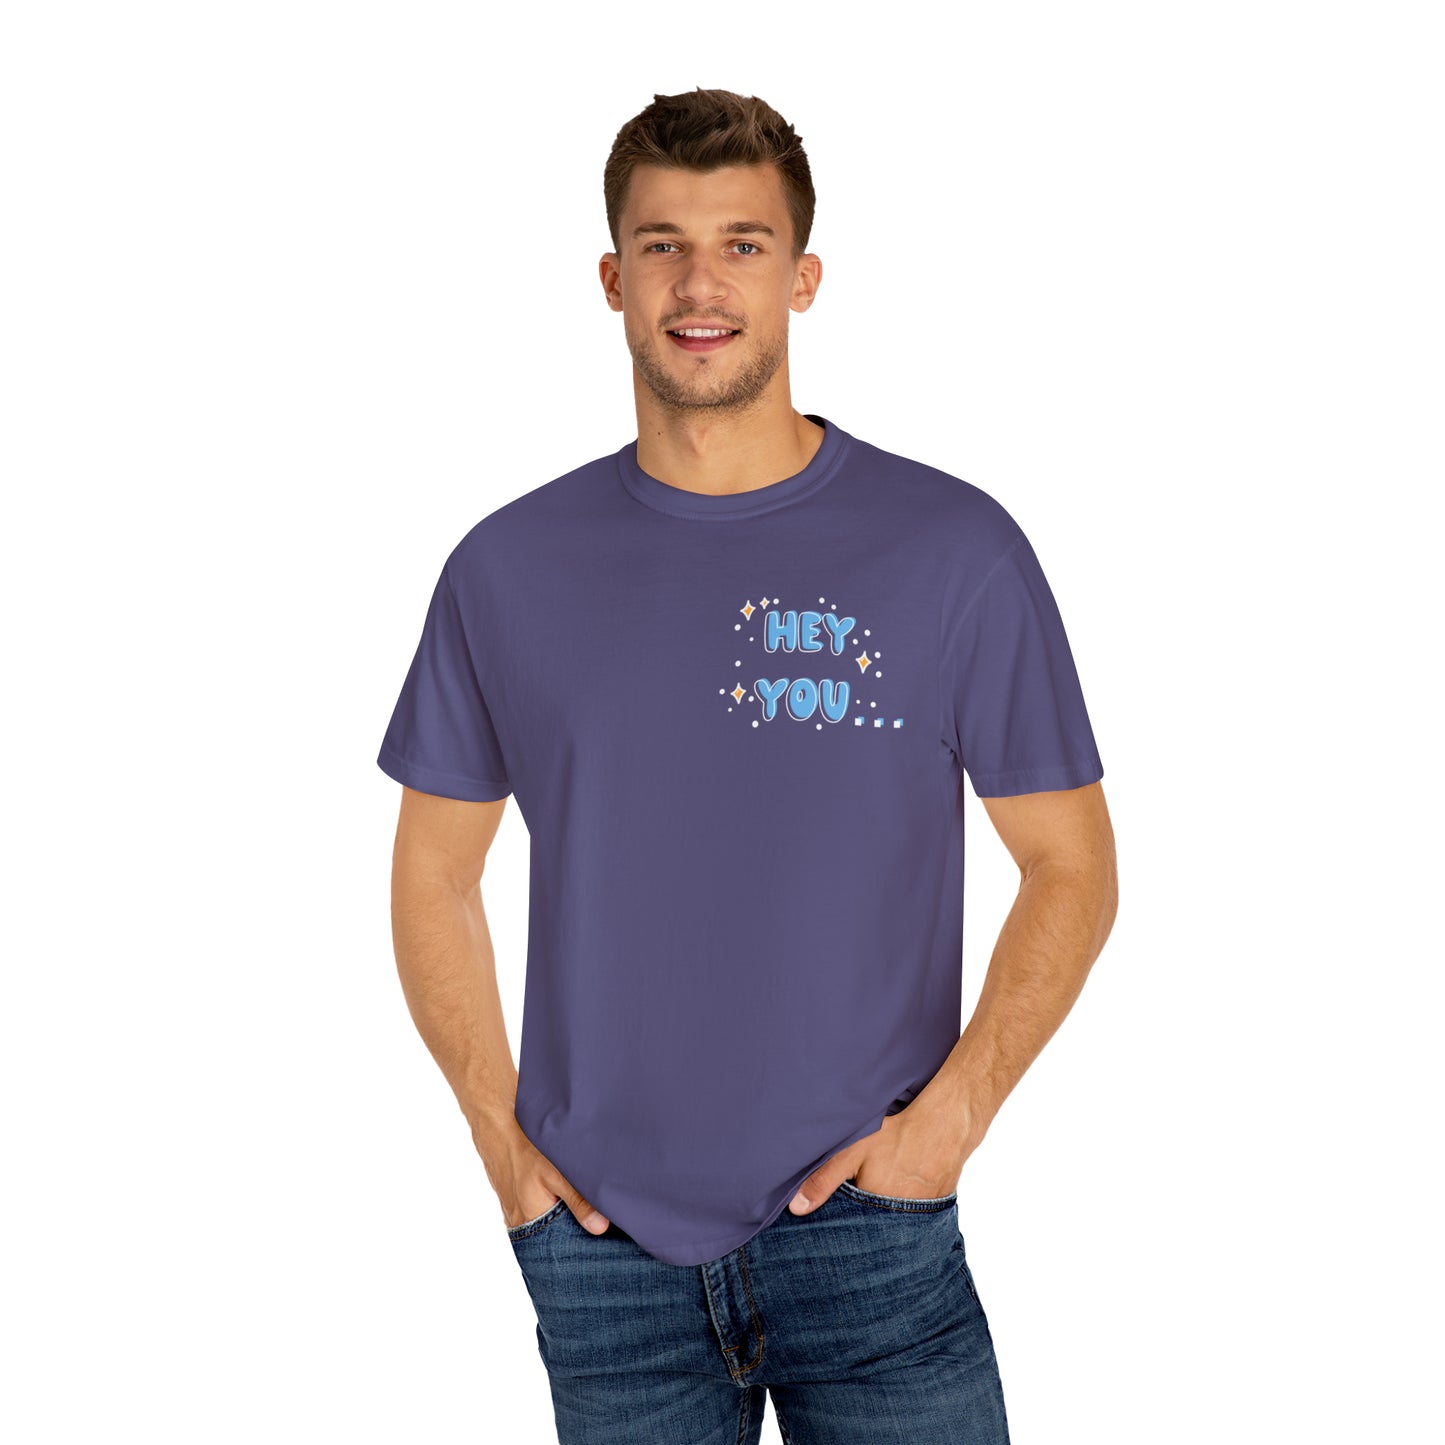 Hey you - you are more than enough - Tee - Comfort Colors